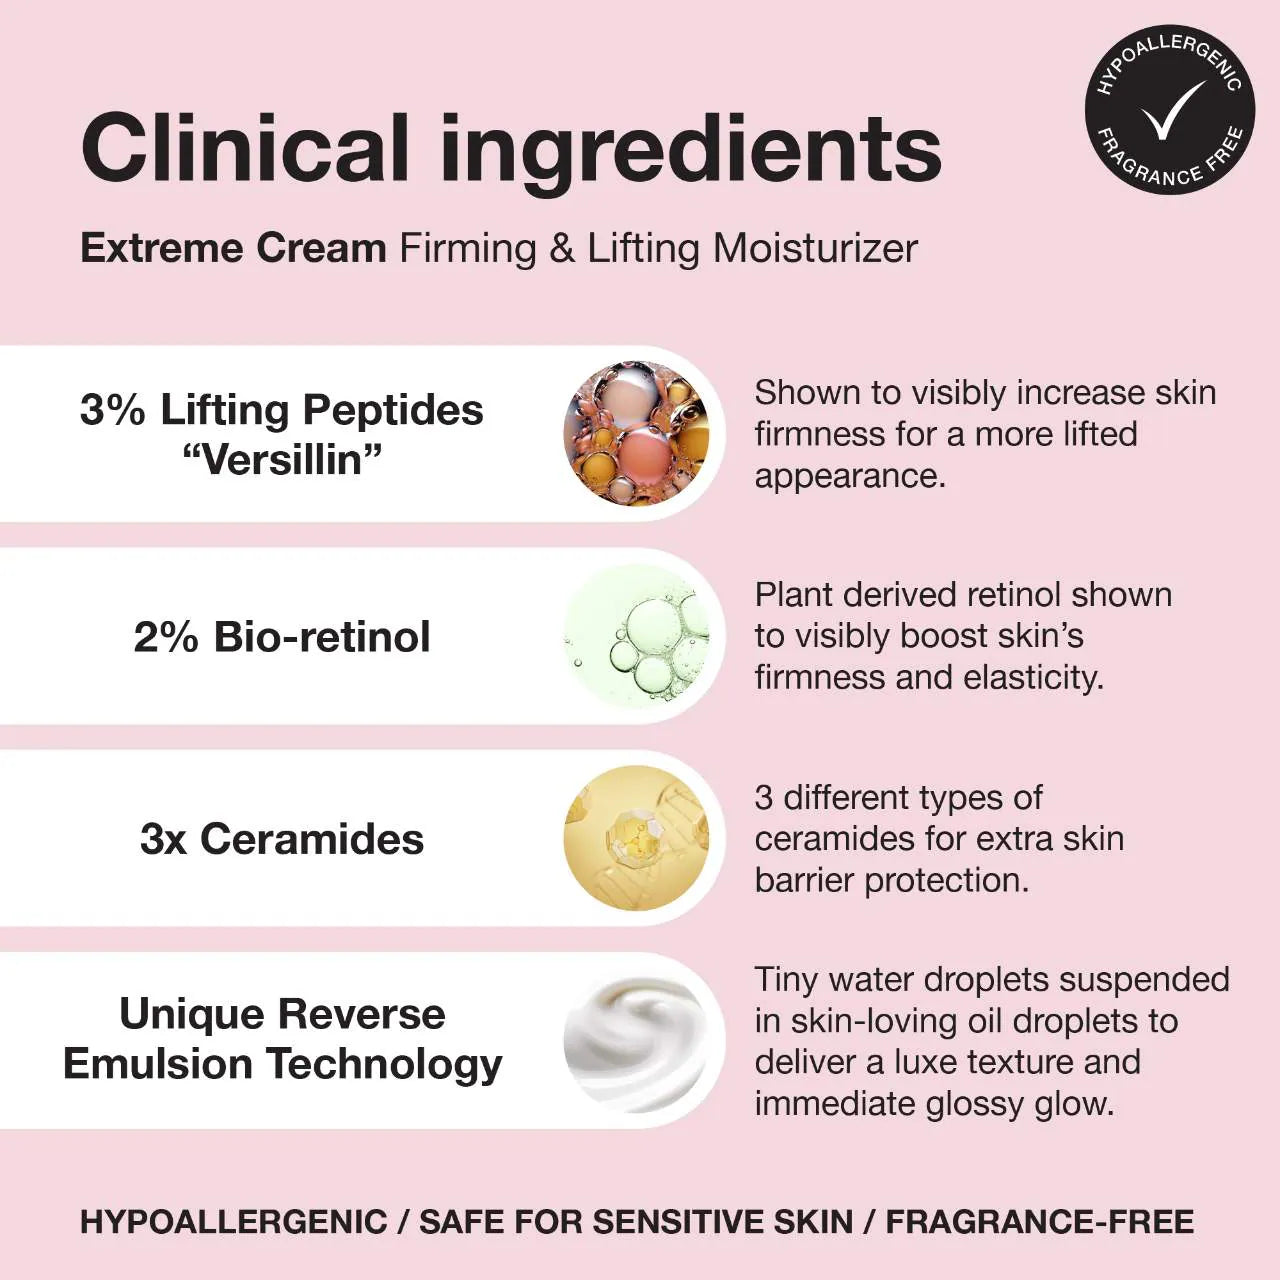 iNNBEAUTY PROJECT Extreme Cream Anti-Aging, Firming, & Lifting Refillable Moisturizer 50 ml